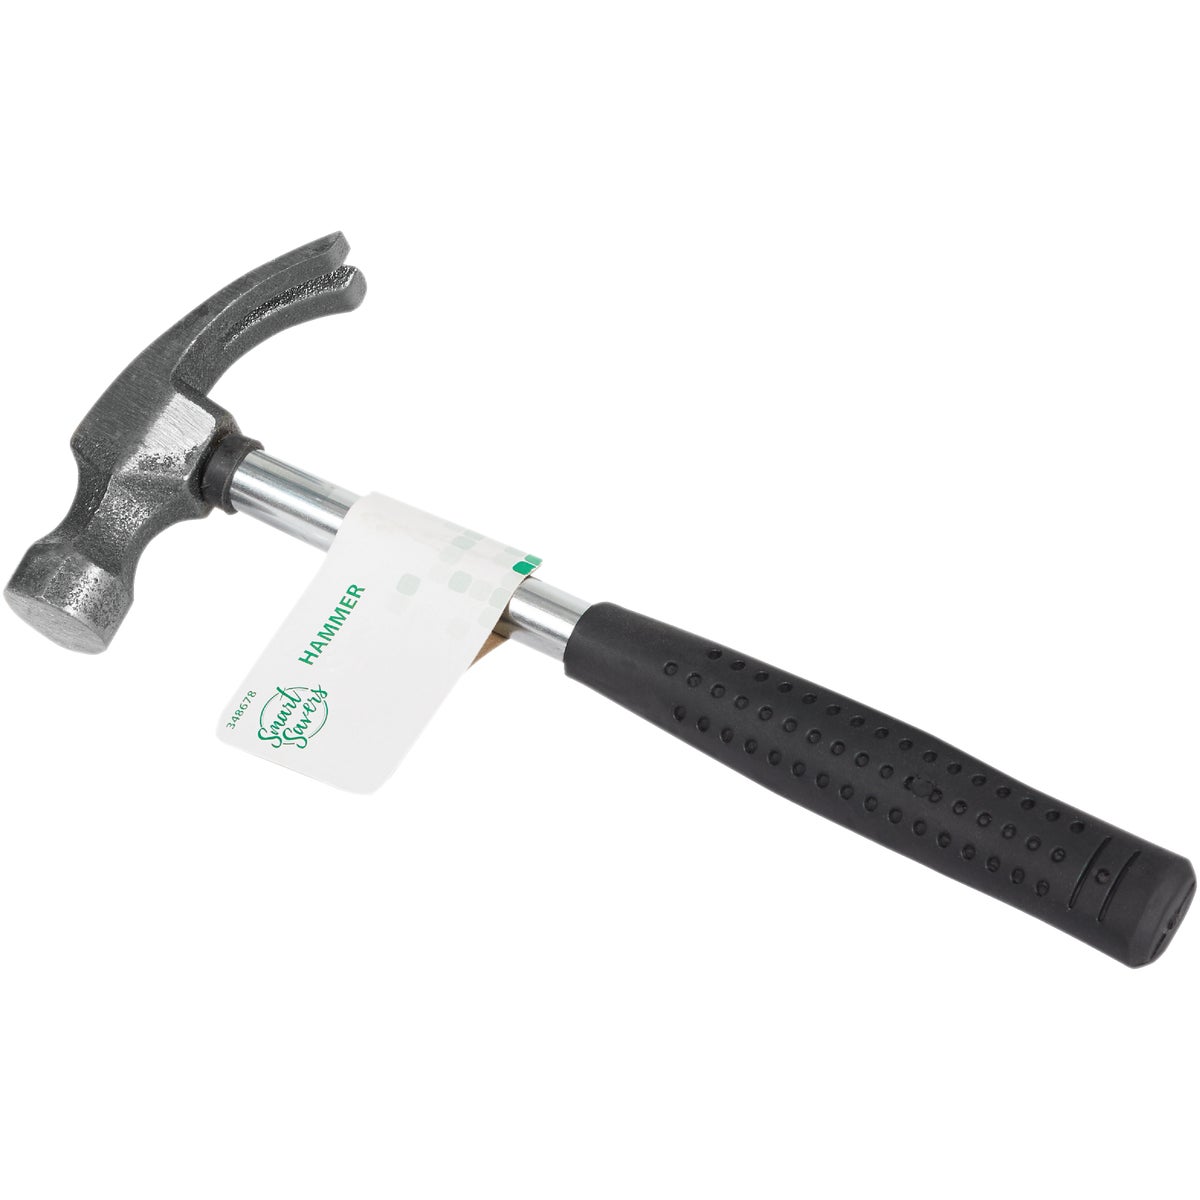 Smart Savers 8 Oz. Smooth-Face Curved Claw Hammer with Steel Handle